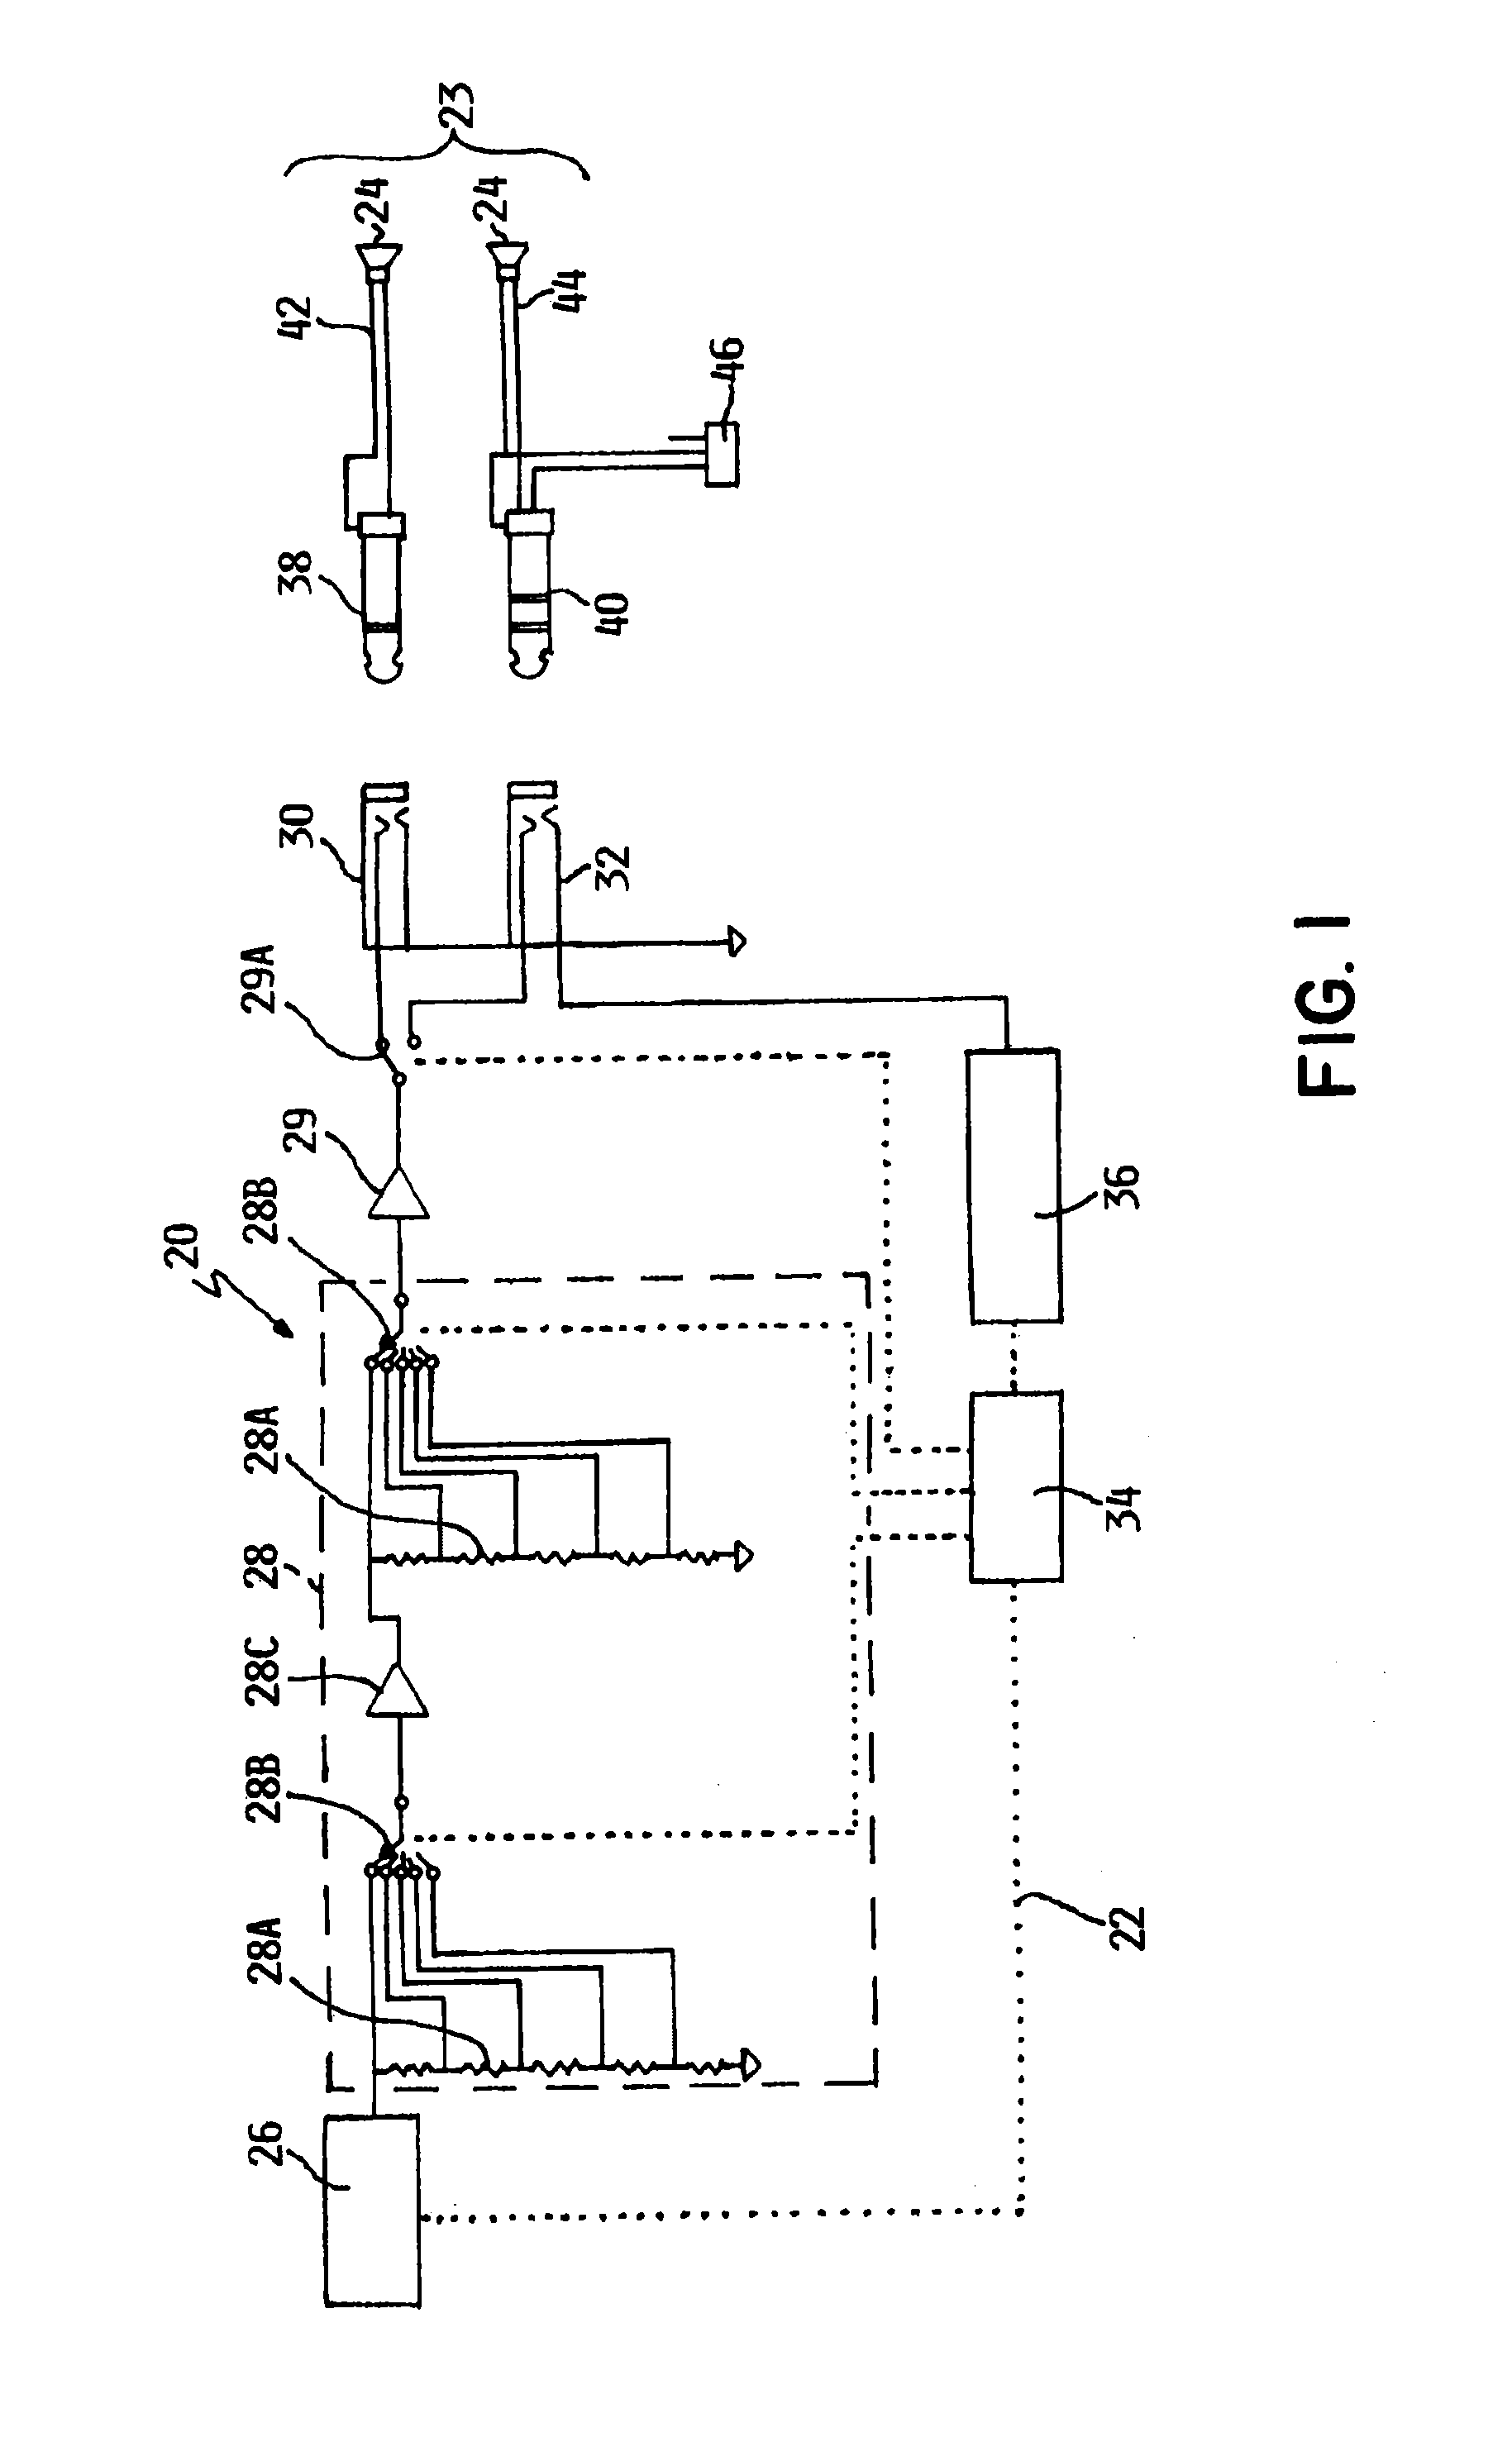 Audiometer with interchangeable transducer